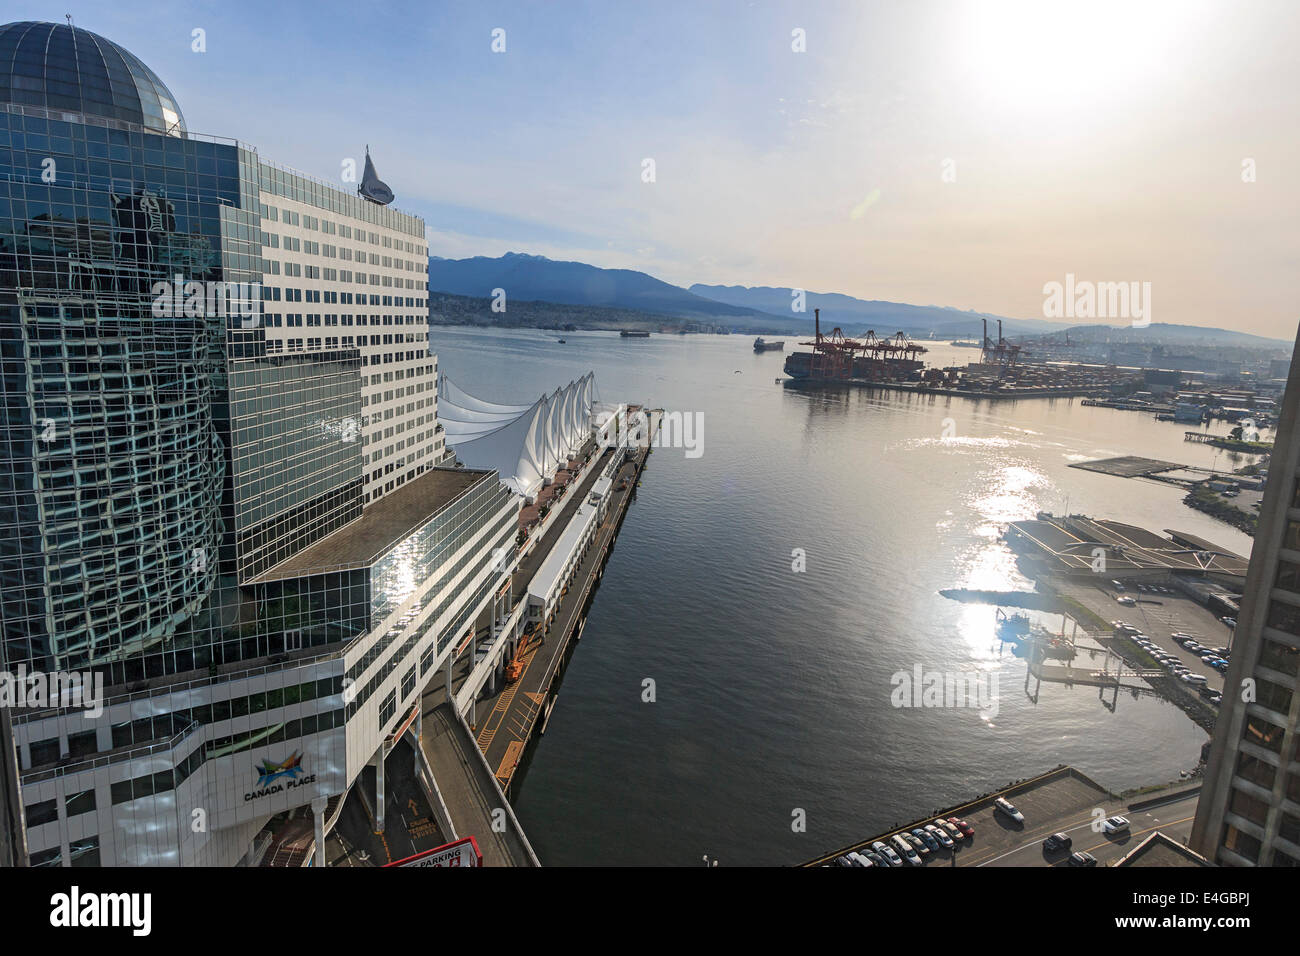 View of Burrard Inlet and the Vancouver waterfront with the Pan Pacific Hotel, convention Centre and World Trade Centre Stock Photo